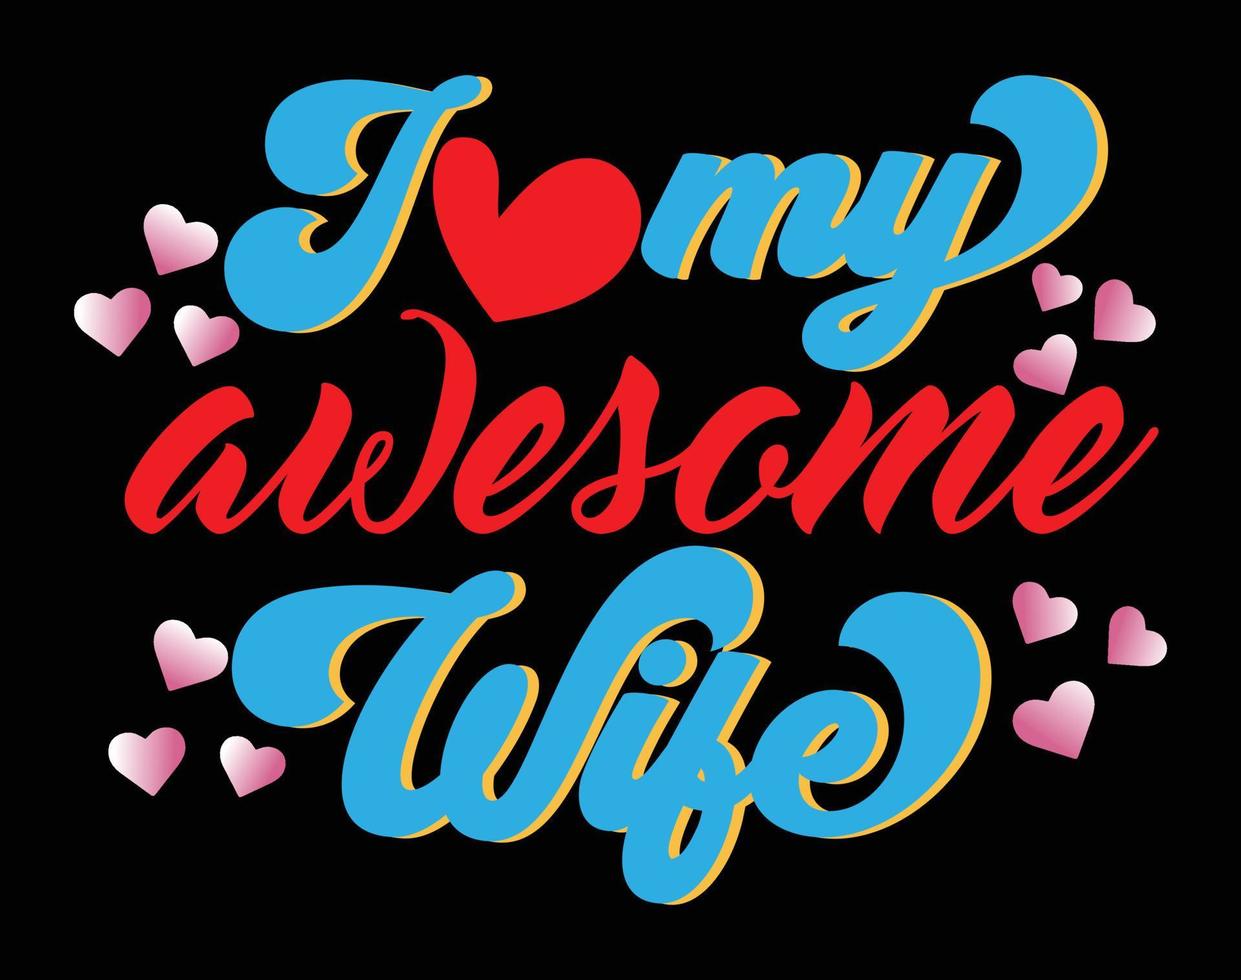 I love my Awesome Wife T Shirt and Apparel Design, Valentine Day Typography T Shirt Design, Valentine Vector Illustration Design for T Shirt, Print, Poster, Apparel, Label, Card